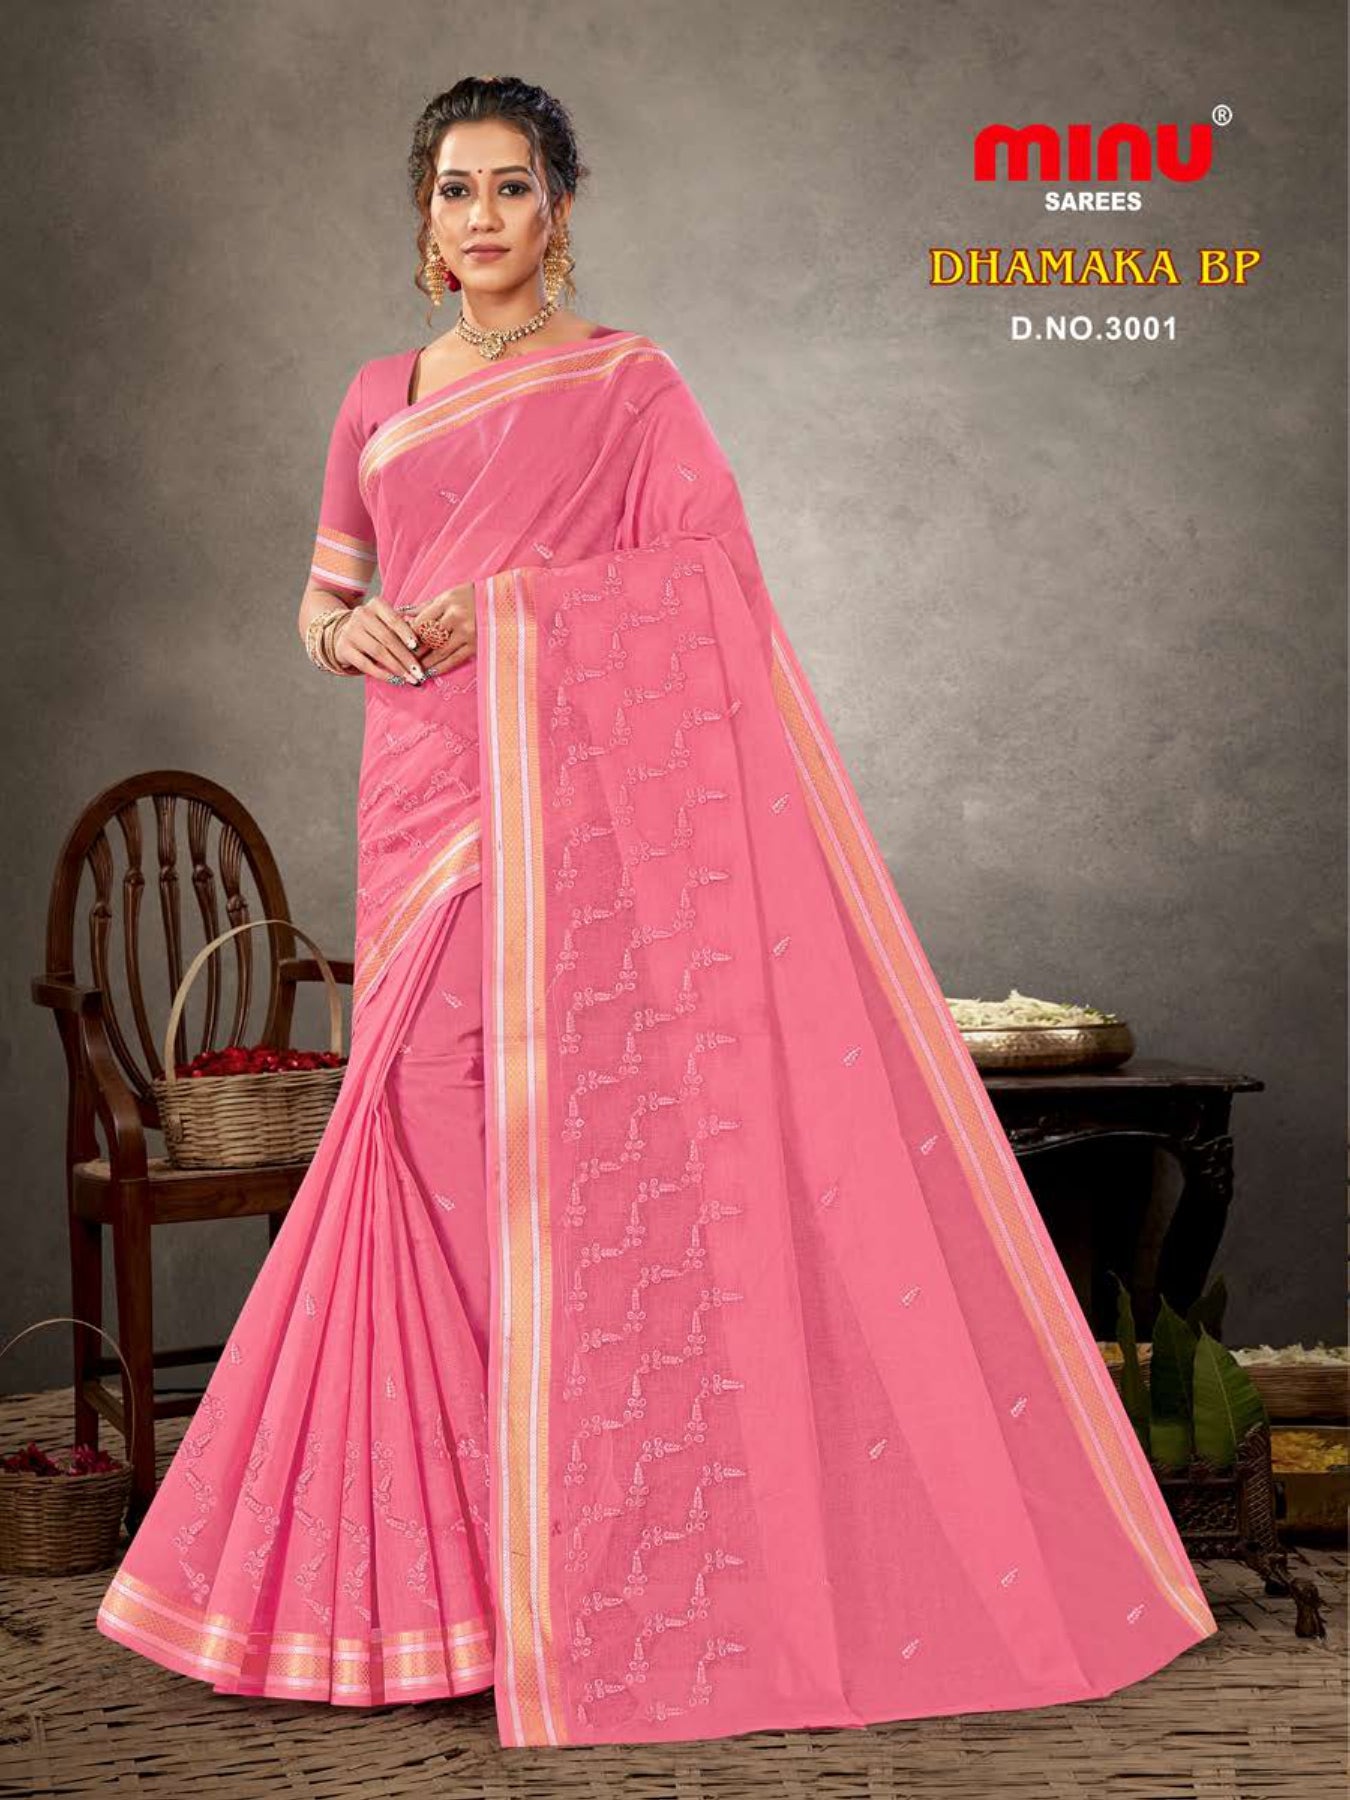 embroidered saree with pink printed design for women